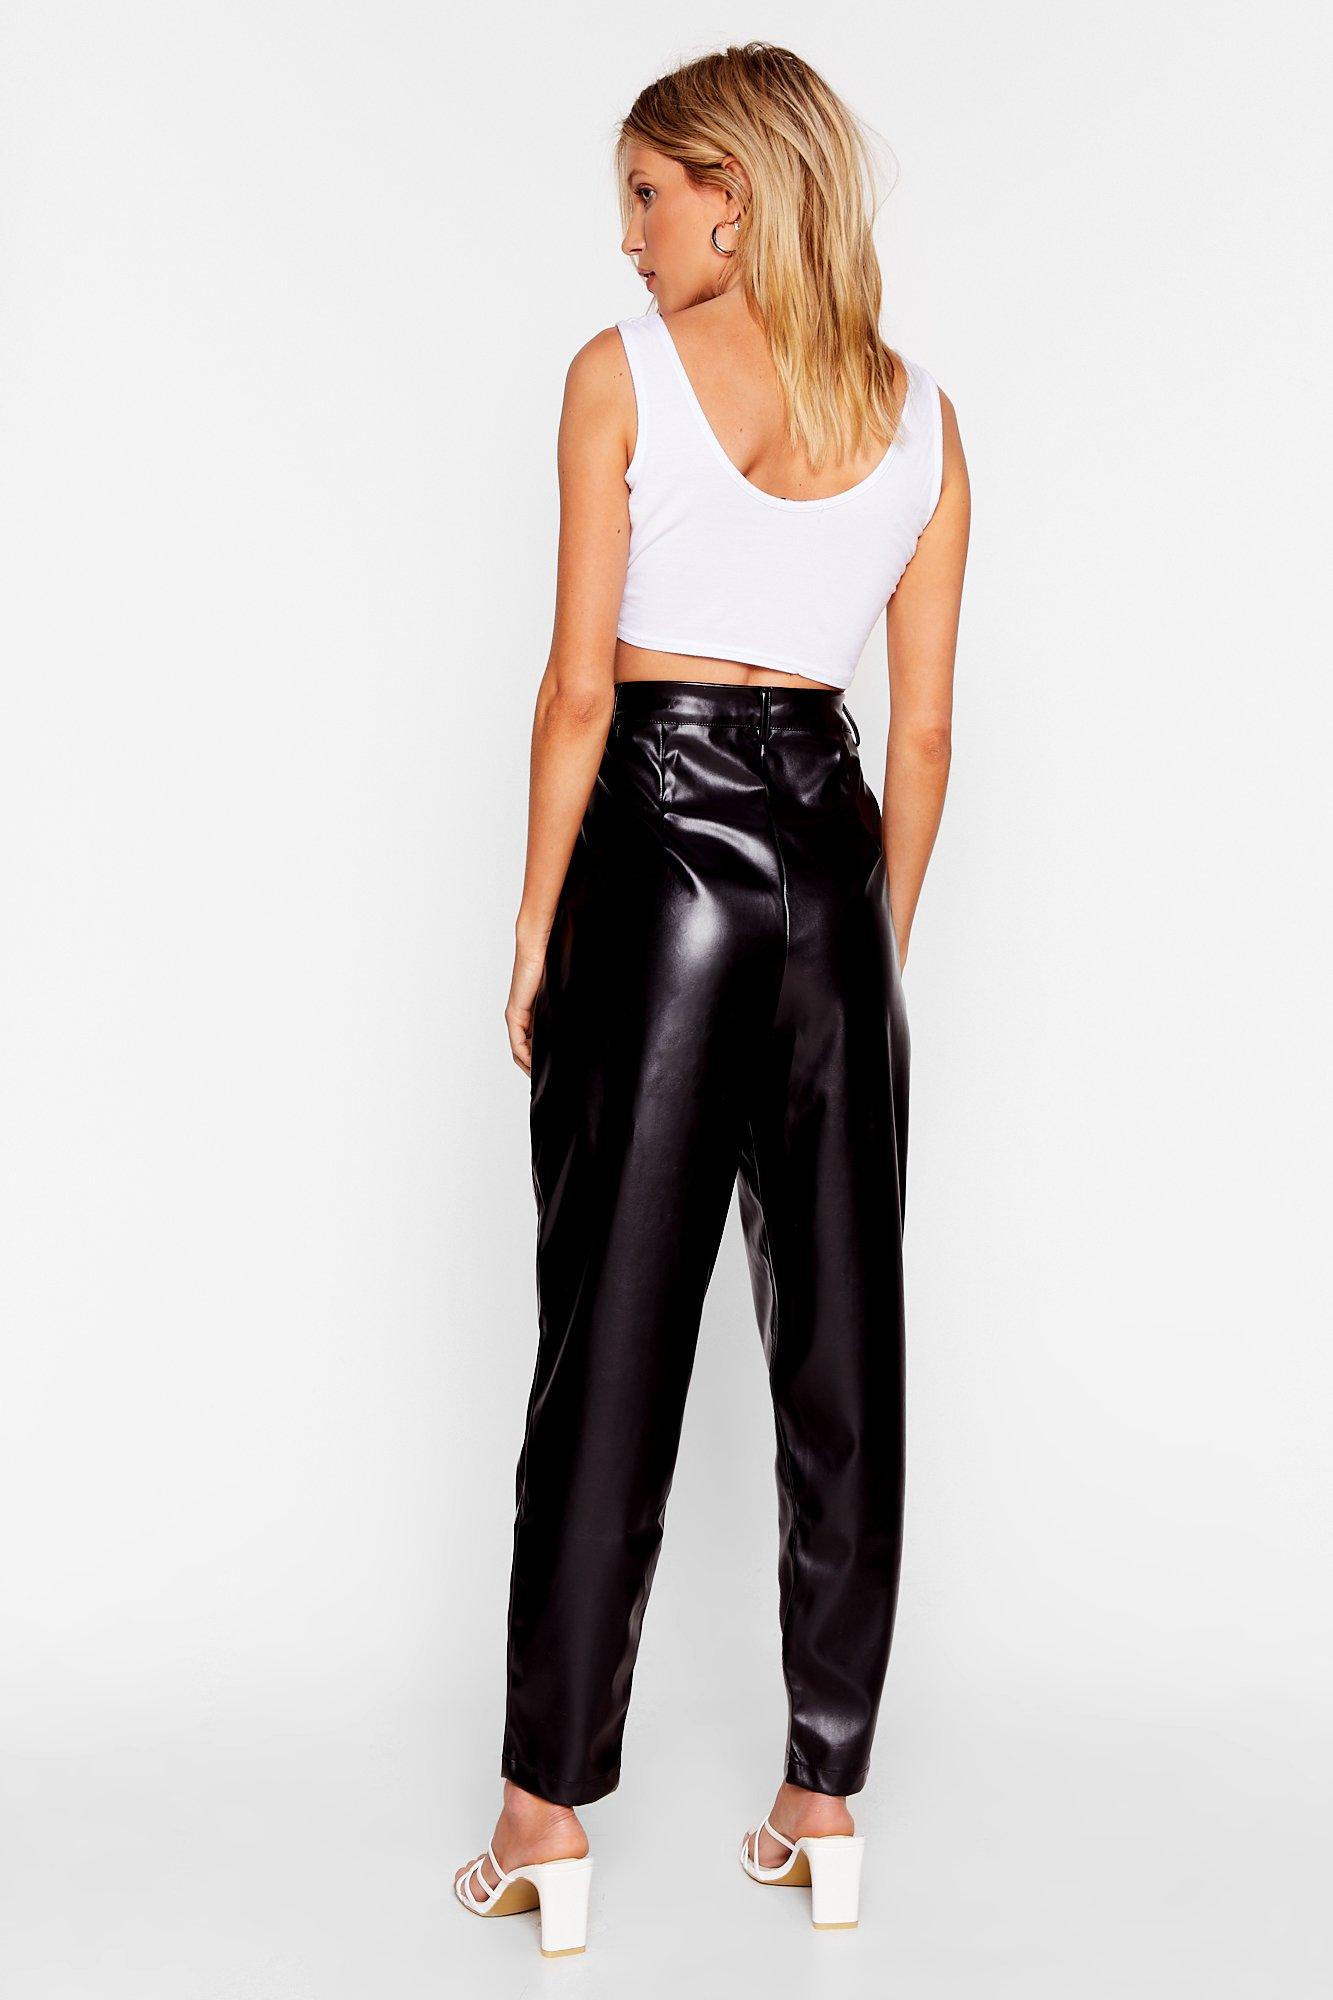 Slit Me Up High-Waisted Faux Leather 